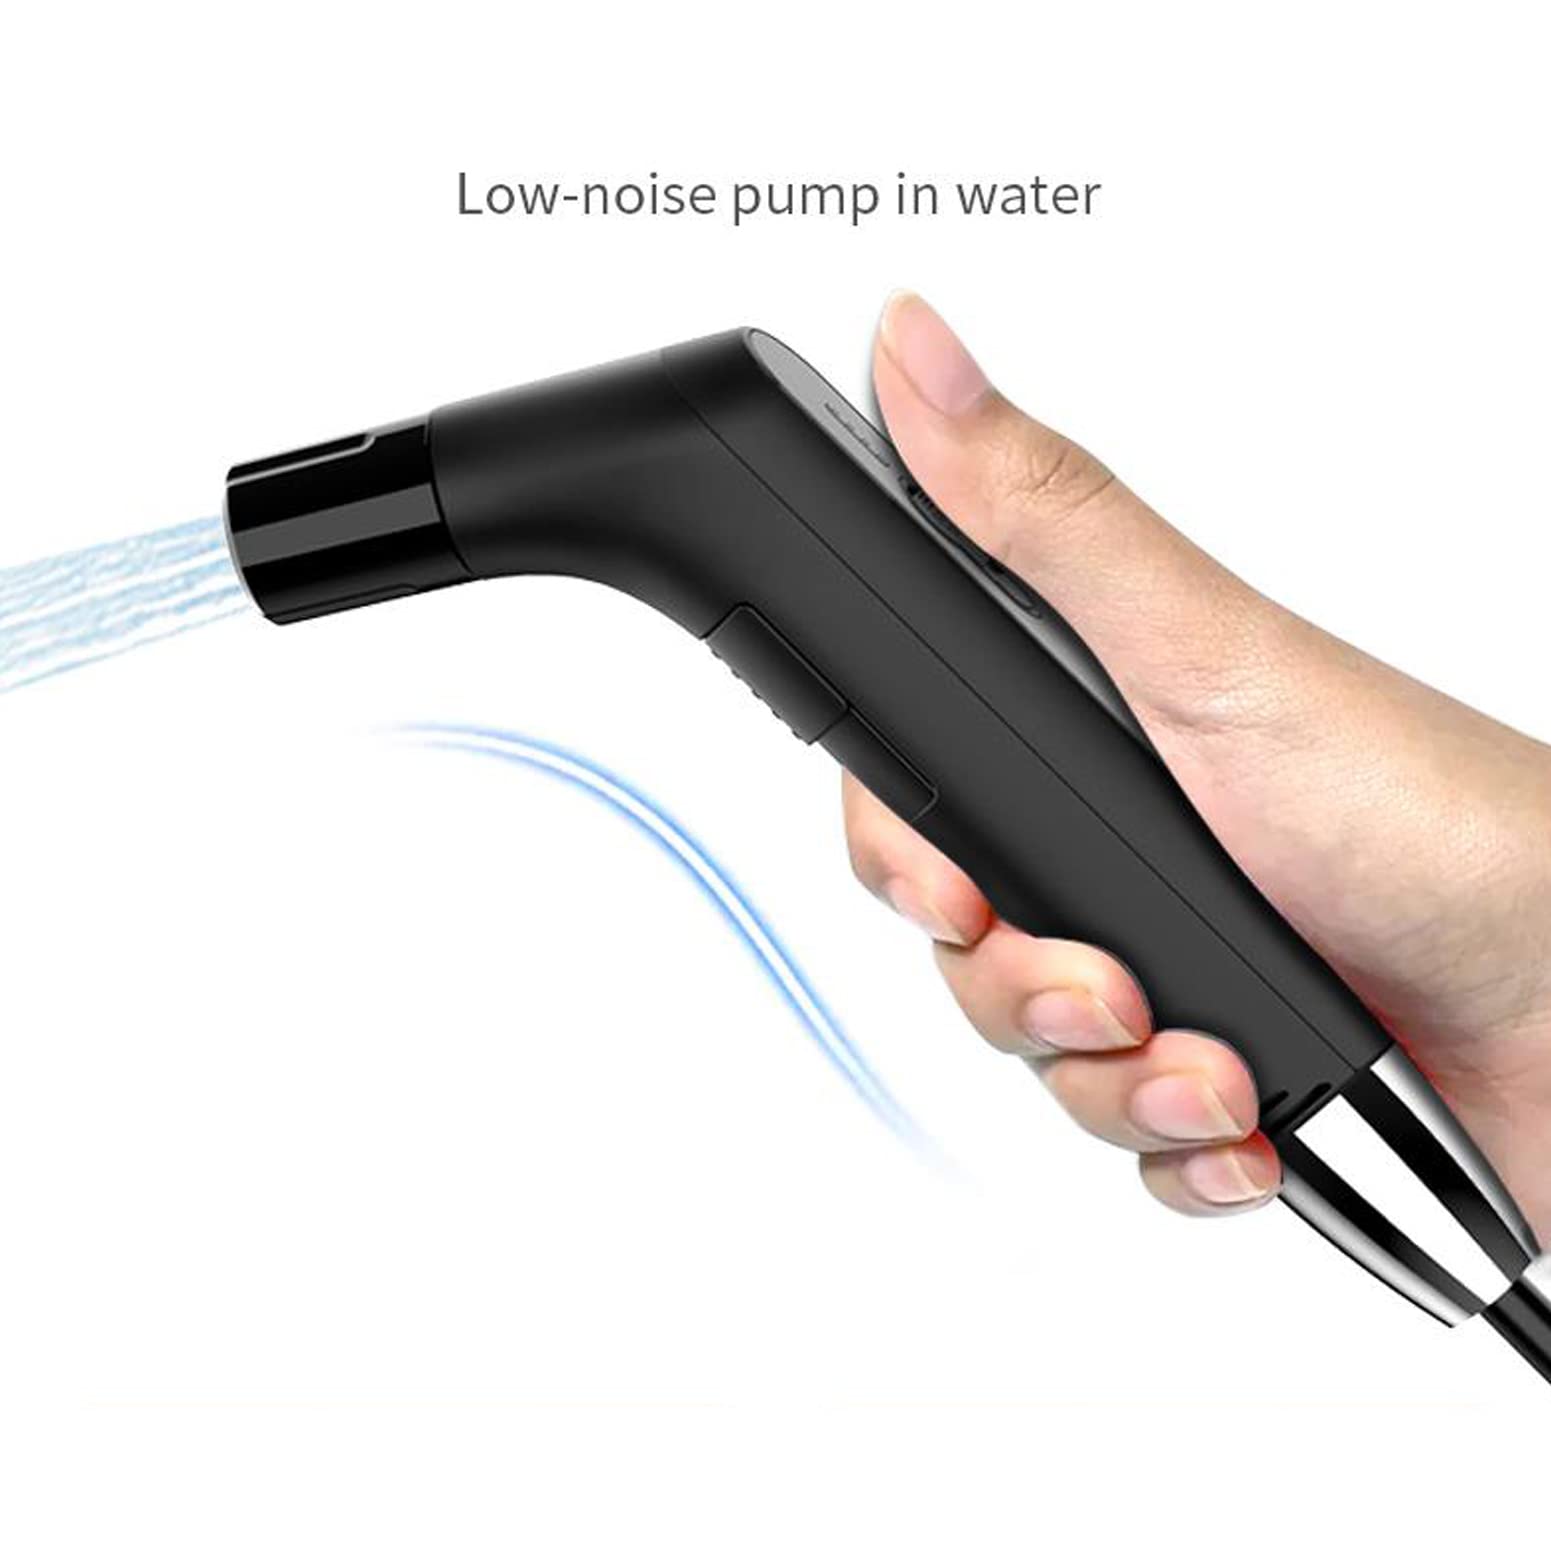 Electric Rechargeable Handheld Personal Travel Bidet Sprayer for Toilet,Bathroom and Outdoor Hiking，Sprayer Muslim Shower Spray Clean with 2.3Liters Water Storage (Black 2.3Liters)